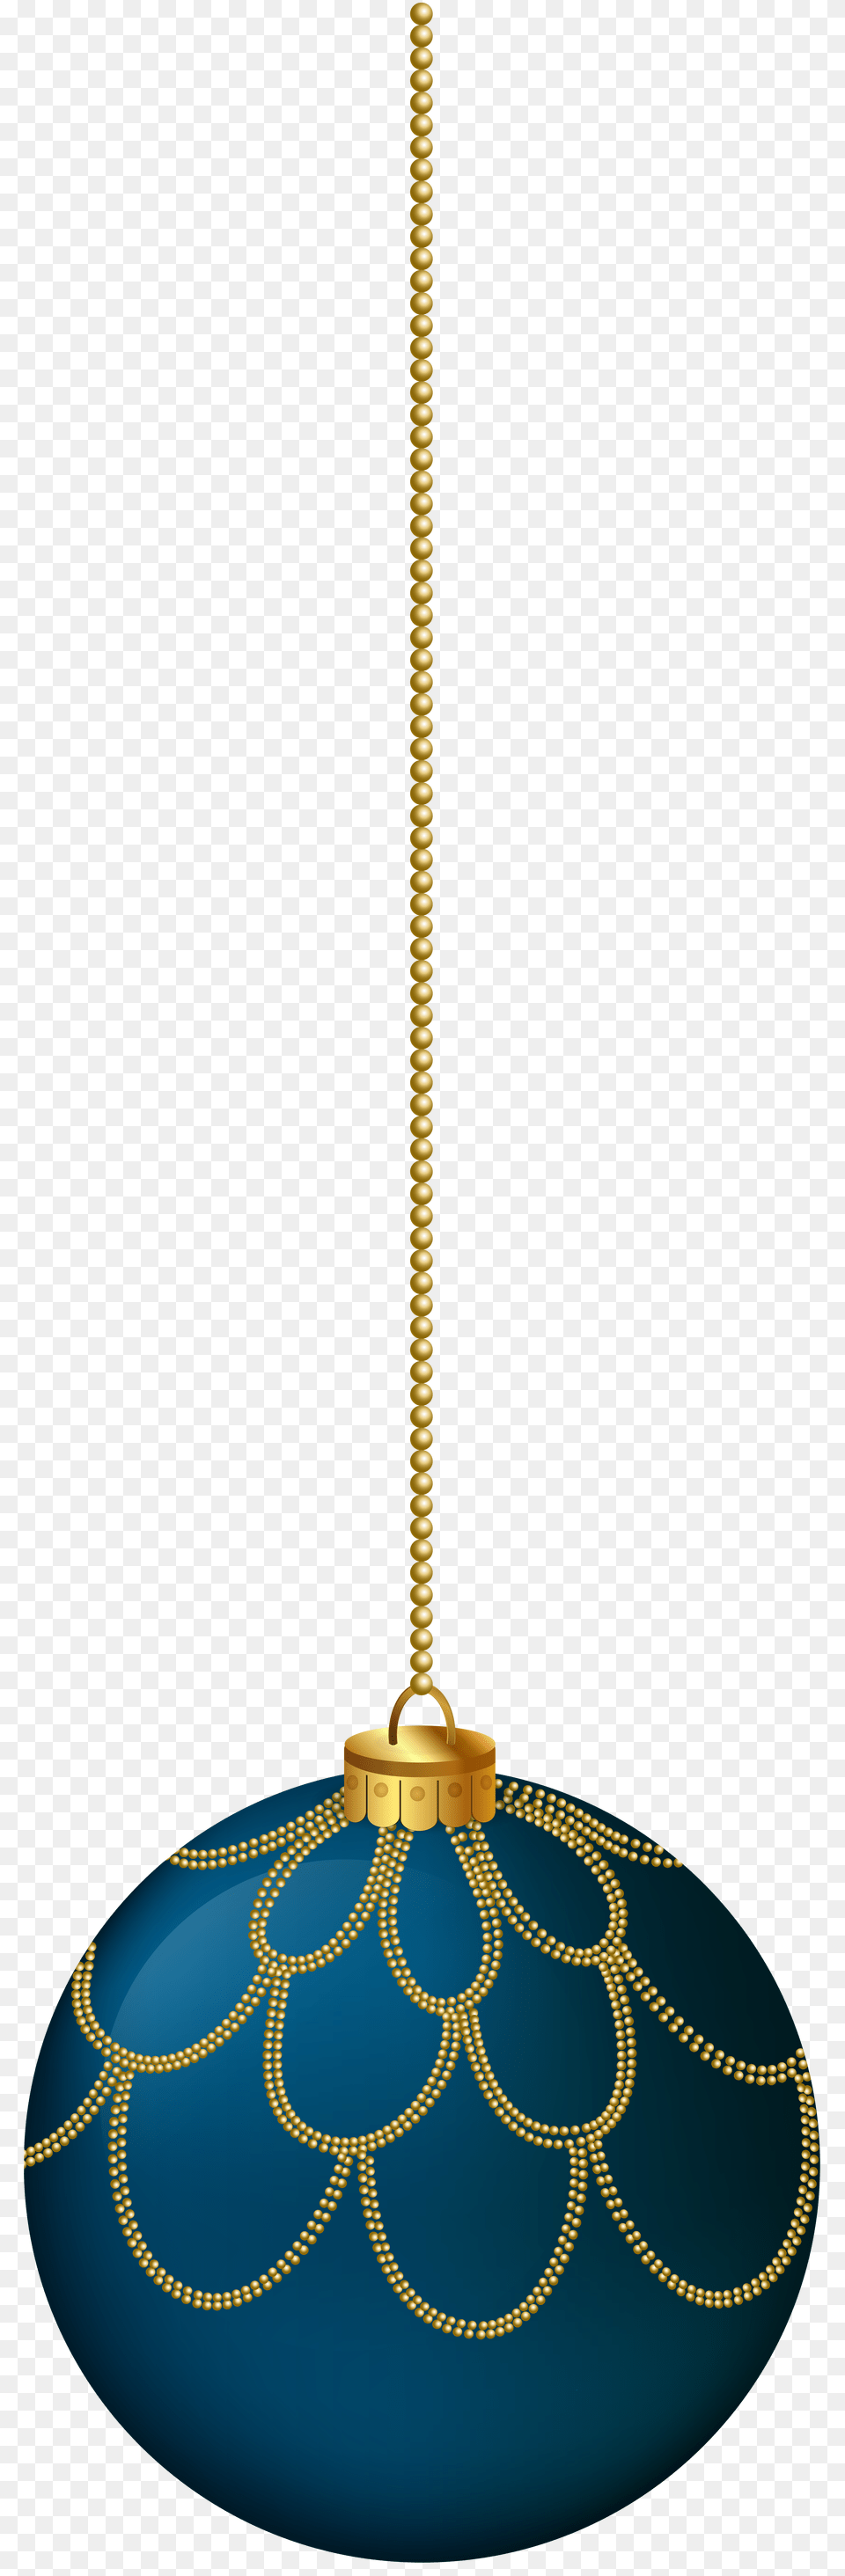 Blue Hanging Christmas Ball Clip, Gold, Smoke Pipe Free Png Download